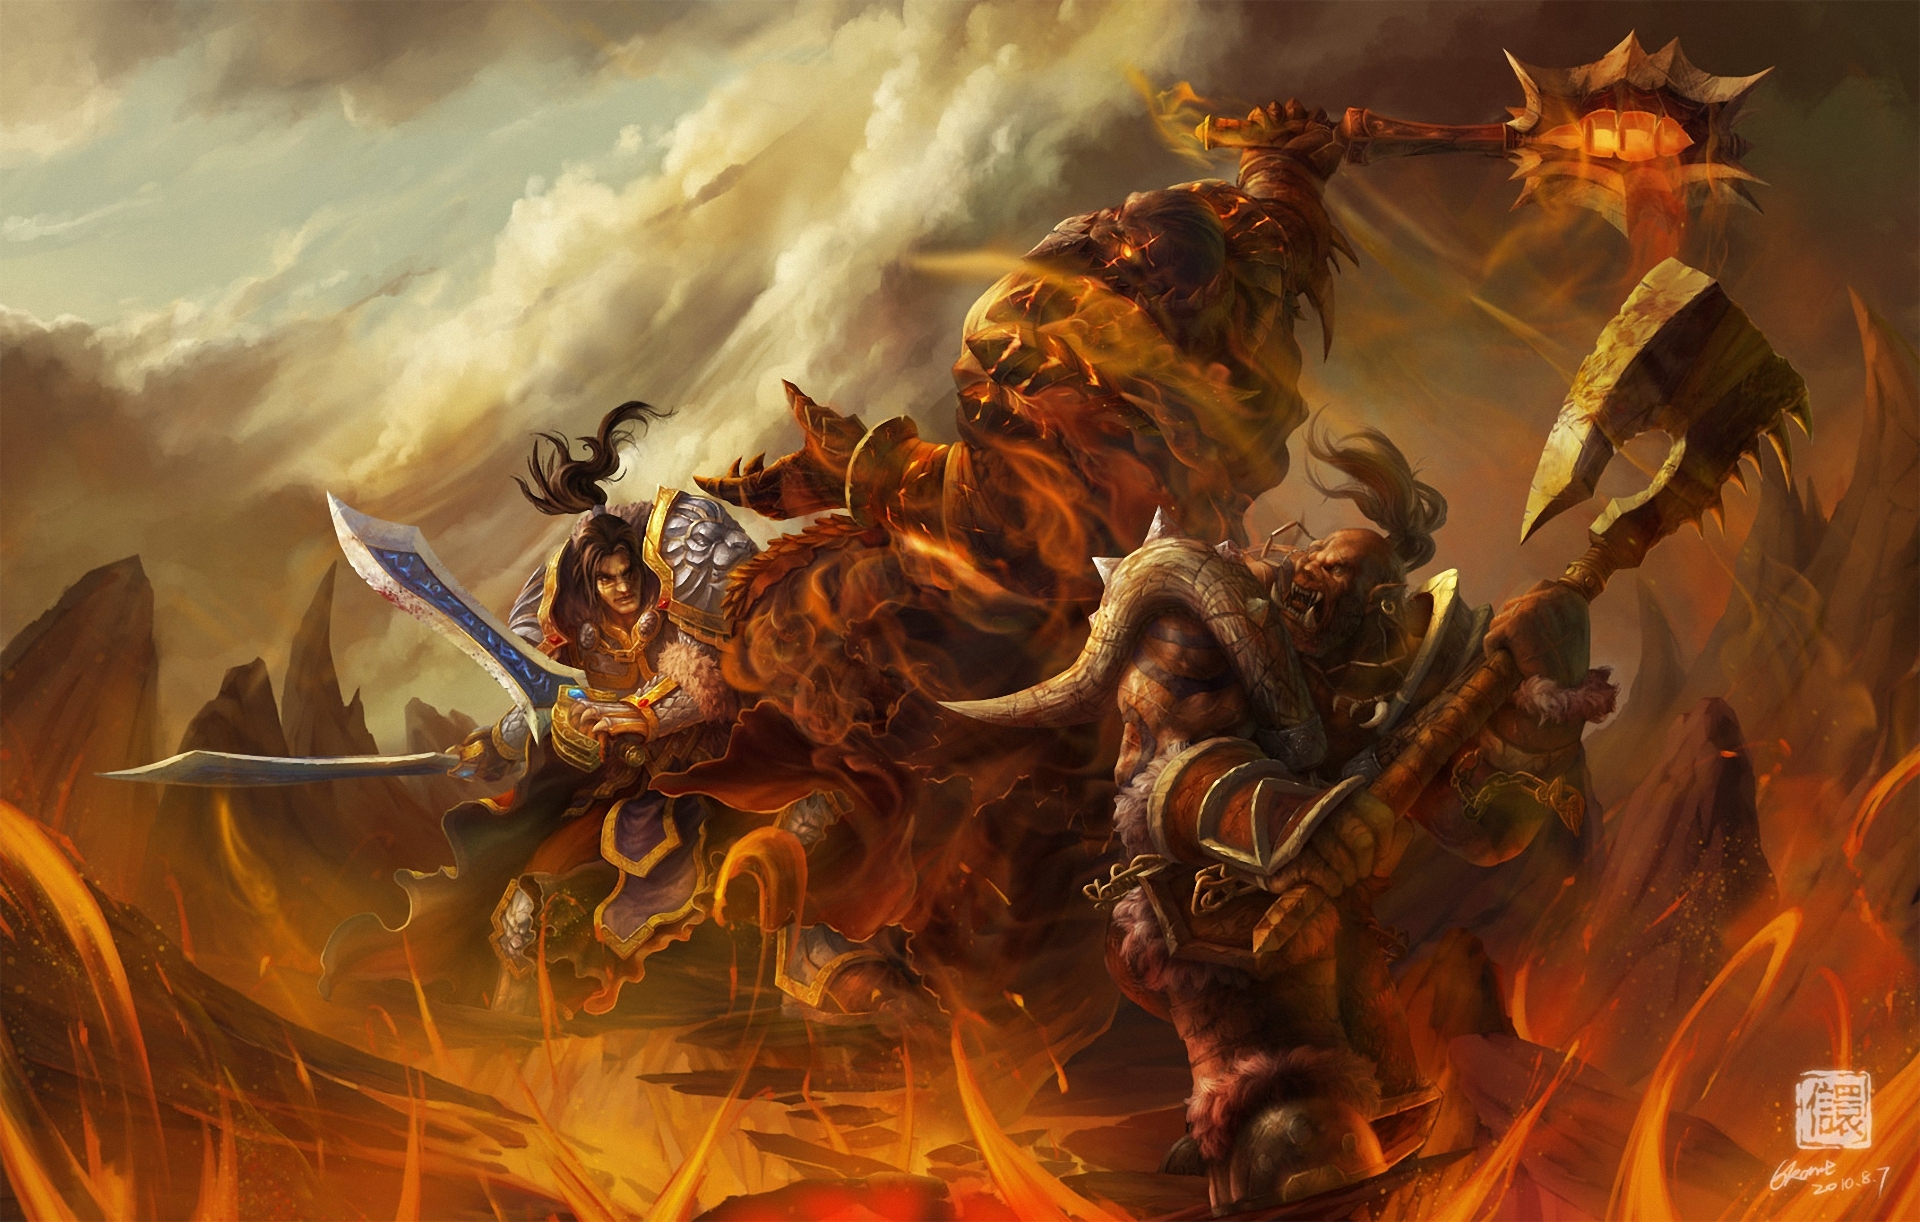 World Of Warcraft Wow Warrior Orc Battle Monster Axe Games Fantasy Wallpapers Hd